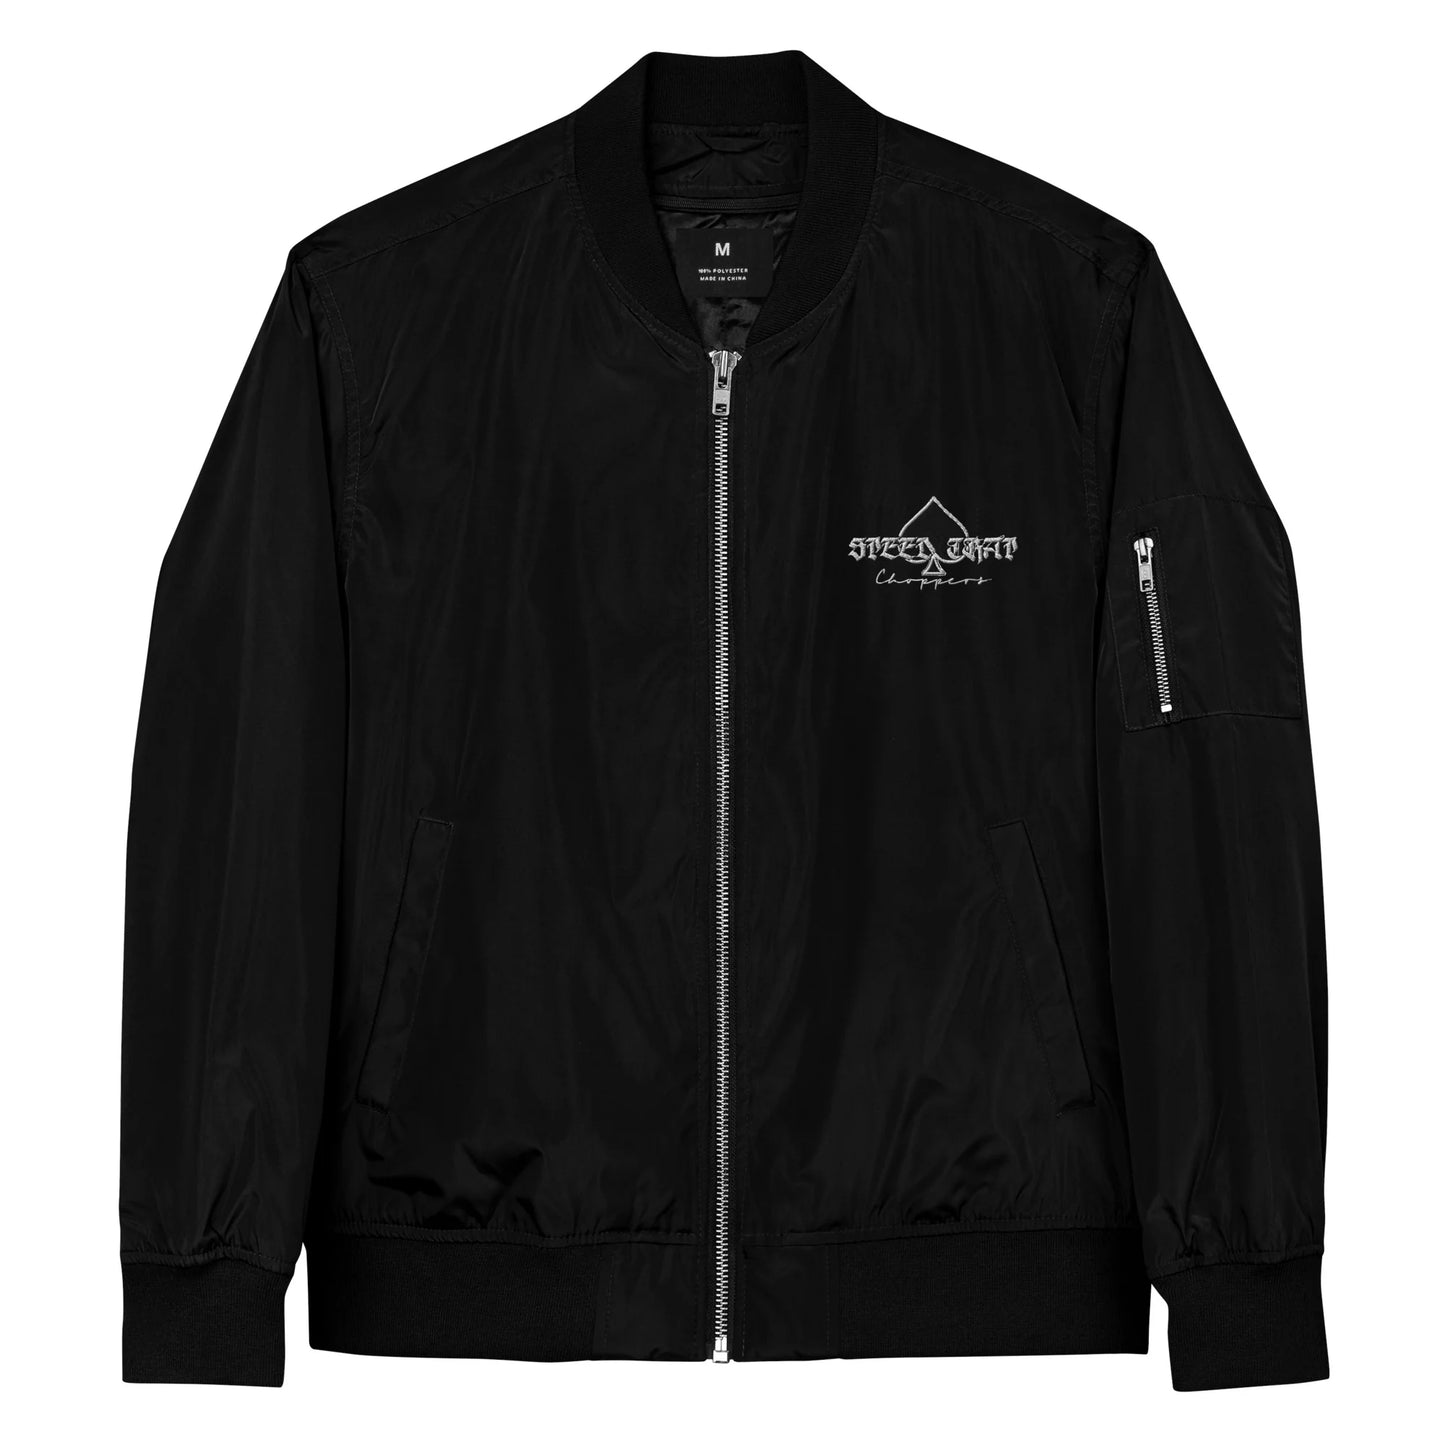 Speed Trap classic Bomber jacket